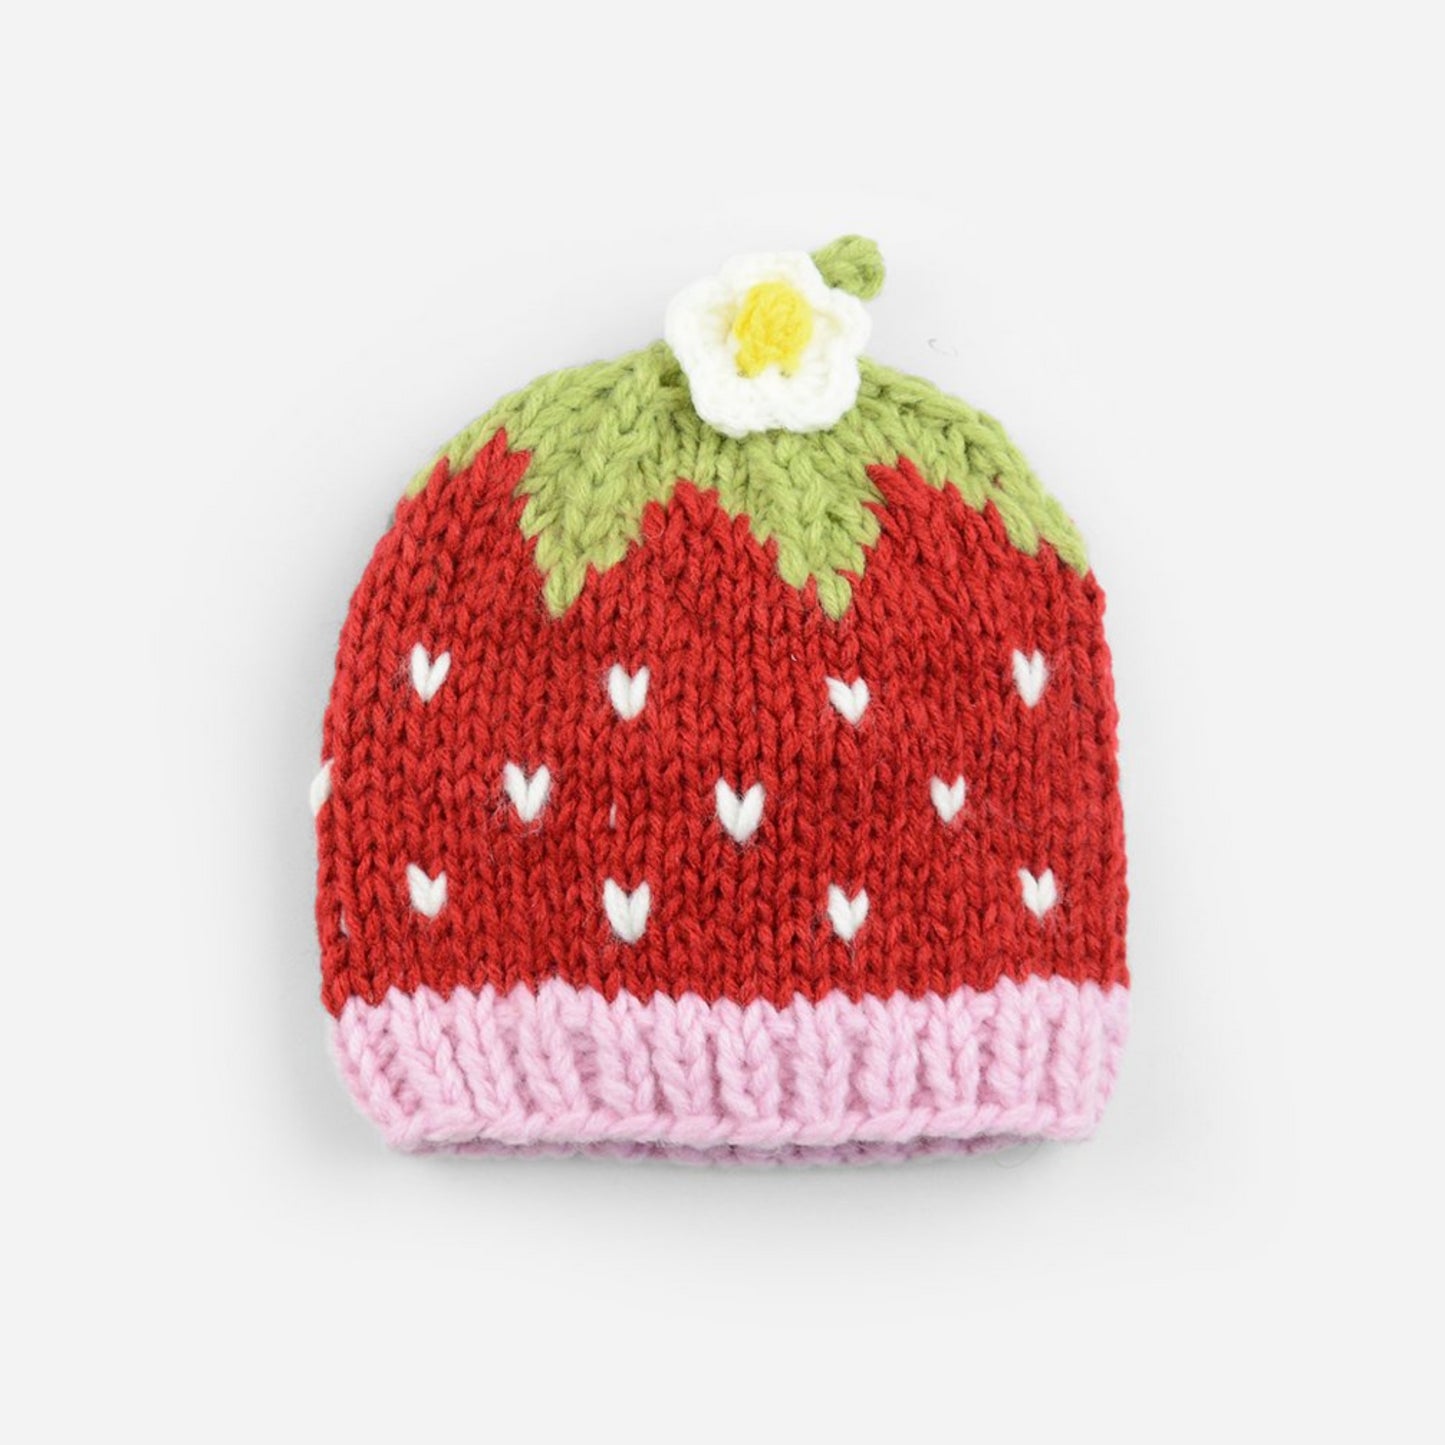 Red strawberry hat pink band green top white flower extra small